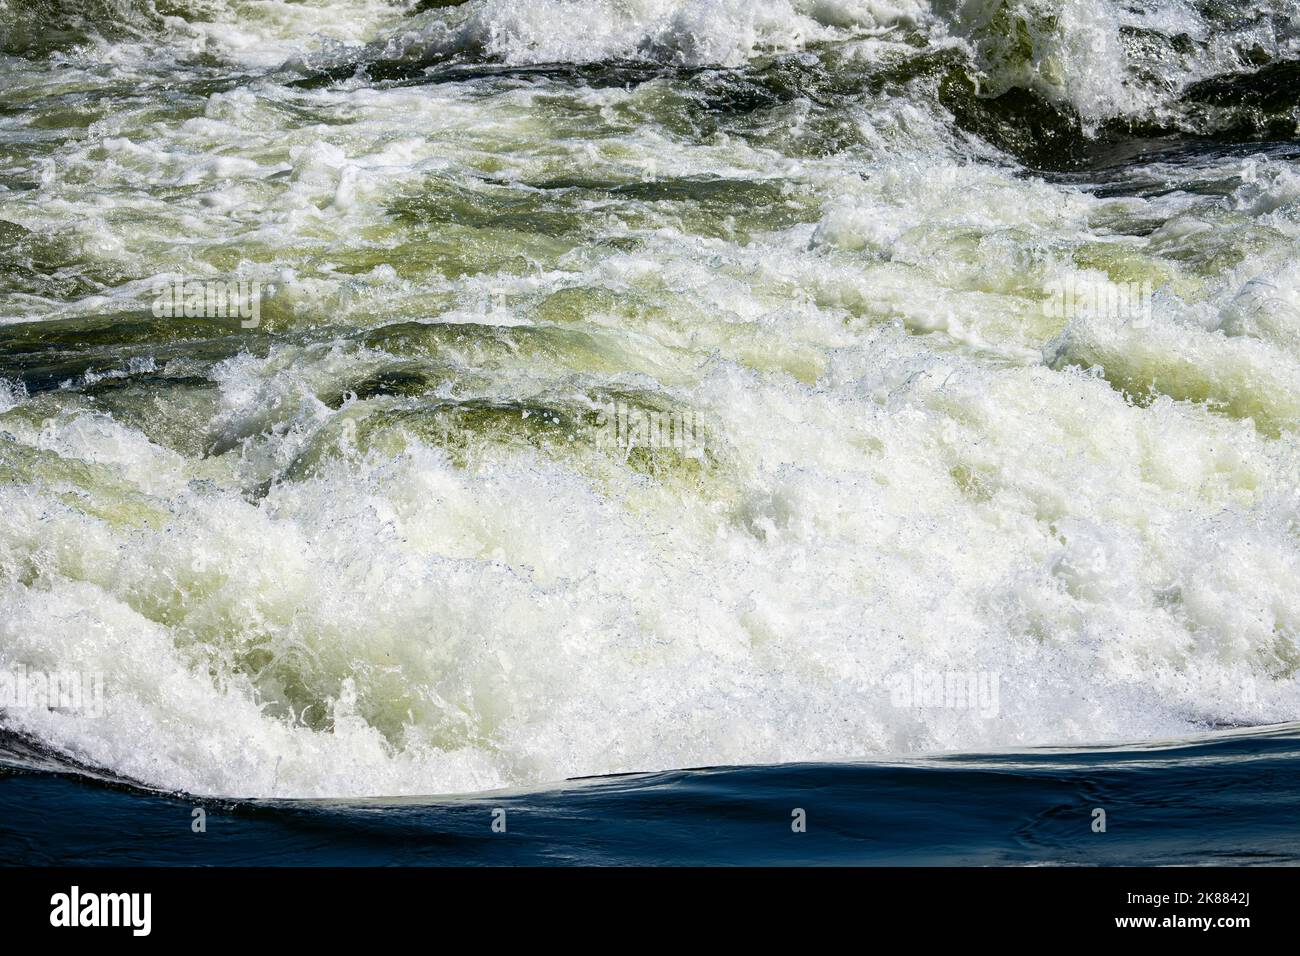 Fast-moving waters of the Lachine rapids in the St. Lawrence River. Stock Photo